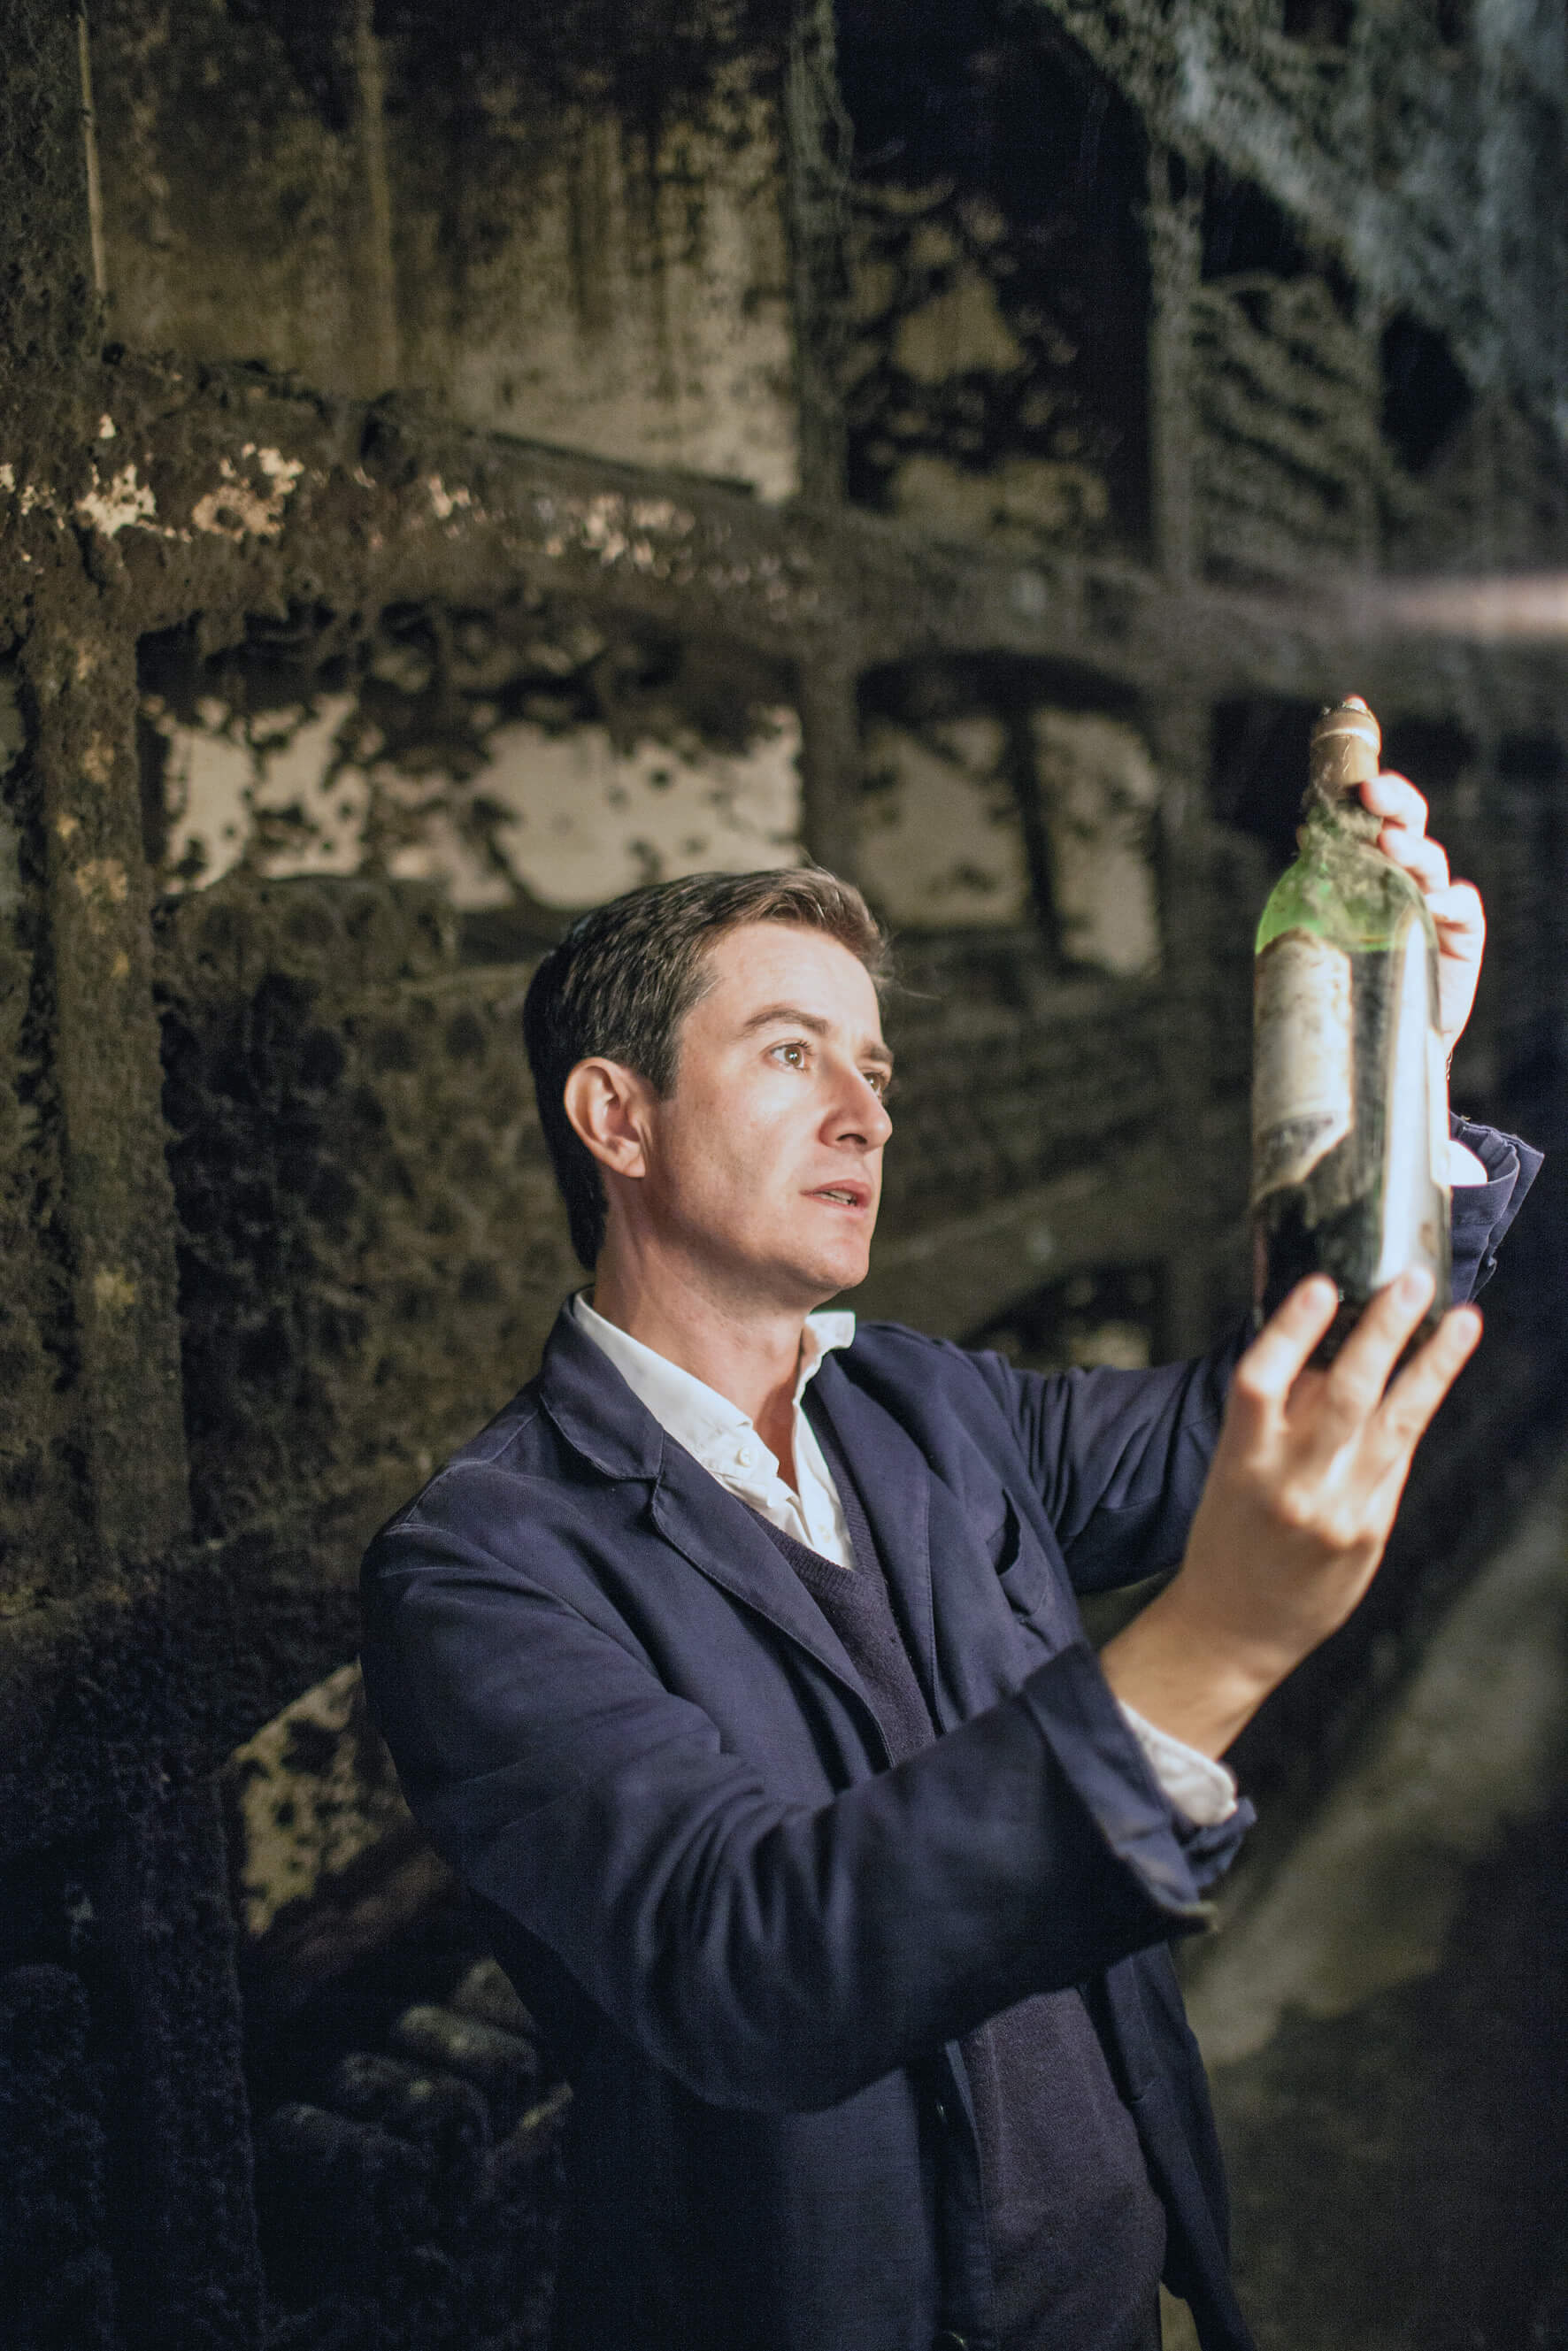 Victor Urrutia - CEO of C.V.N.E. in the vintage cellar inspecting a dusty bottle of Imperial